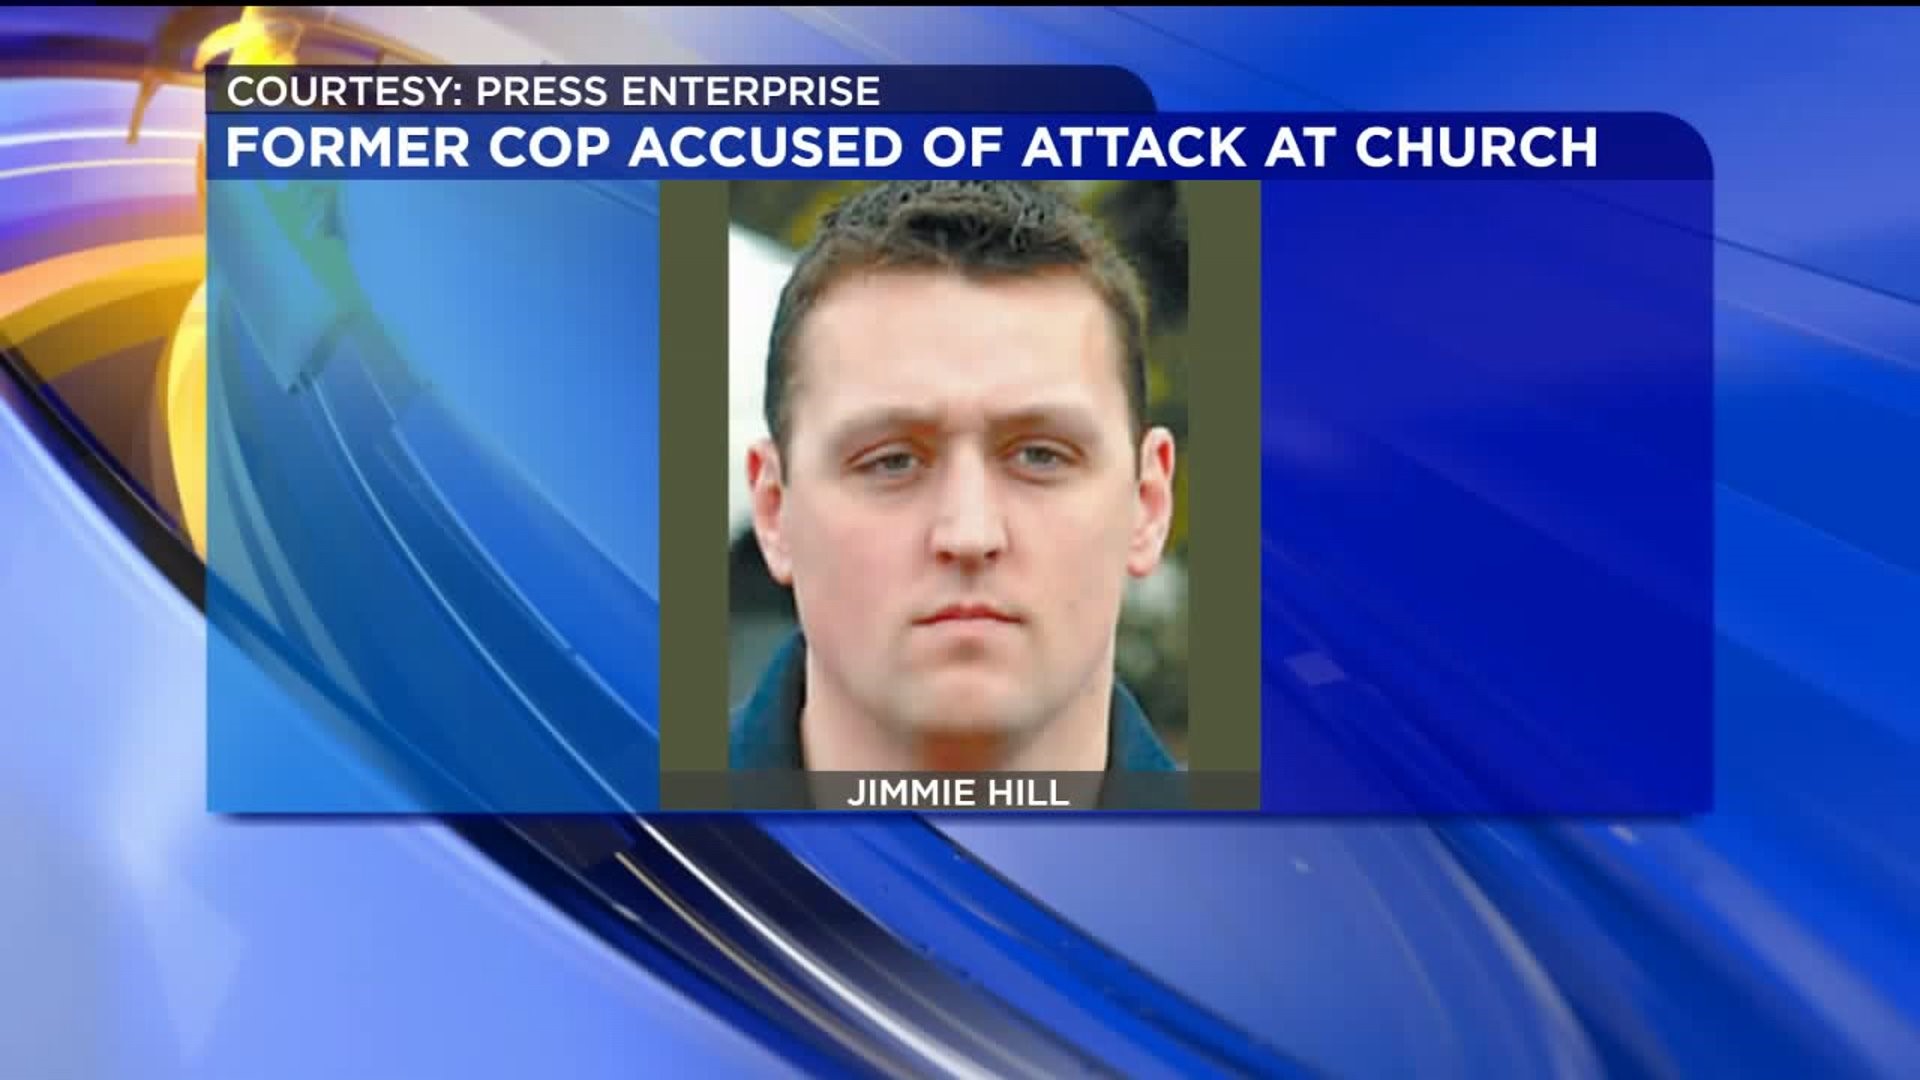 Former Berwick Cop Arrested for choking another man inside church after Easter Service